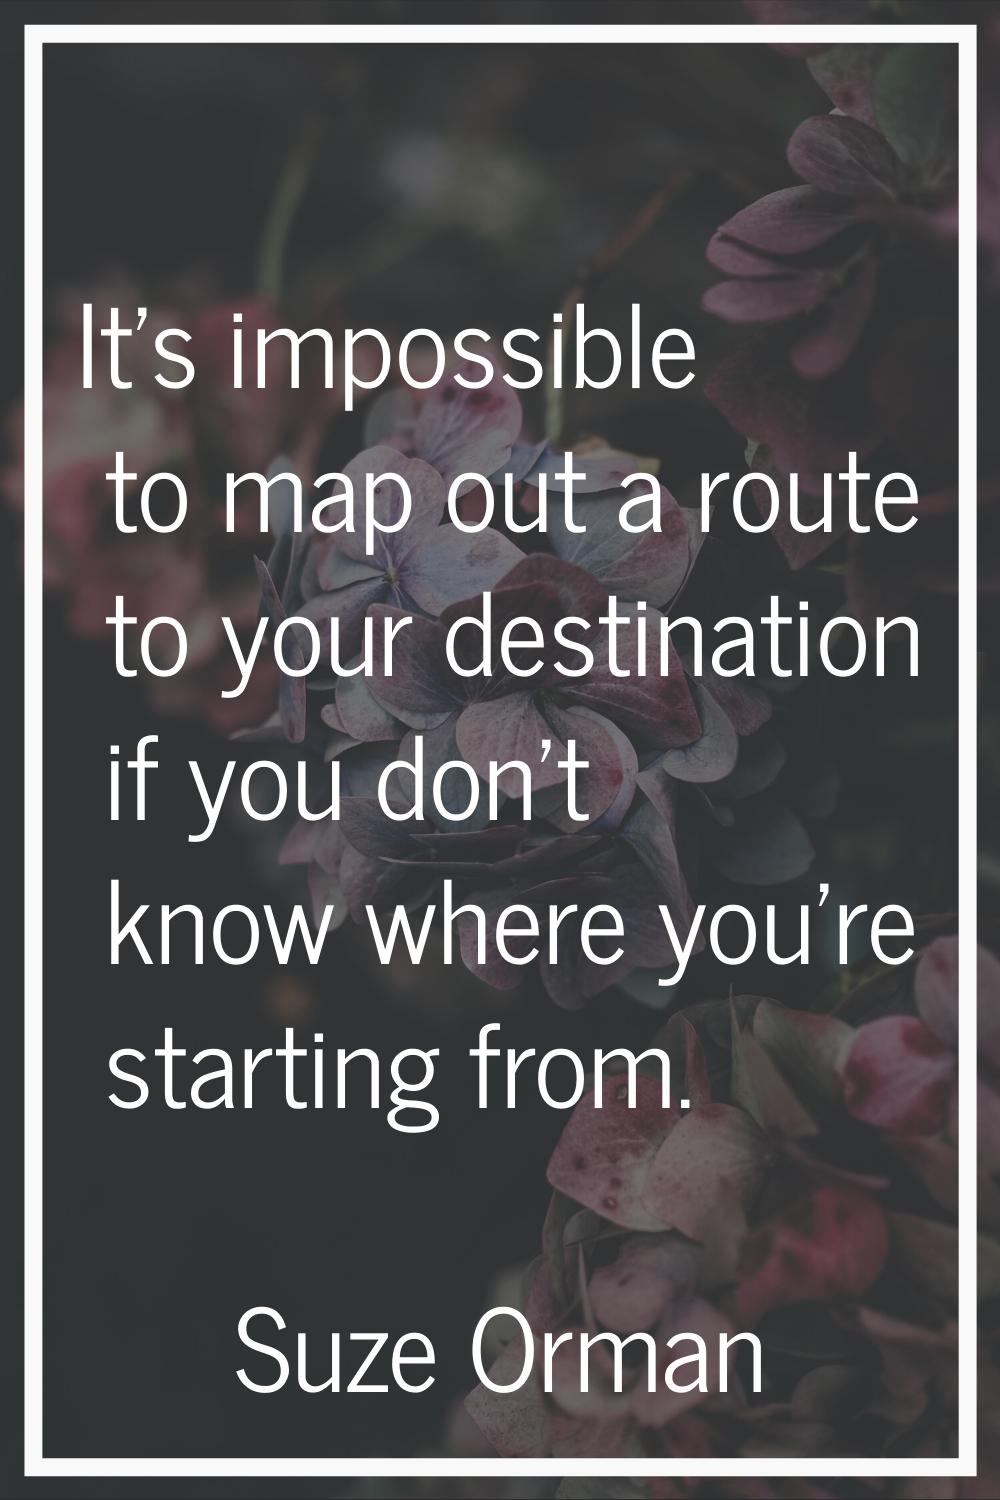 It's impossible to map out a route to your destination if you don't know where you're starting from